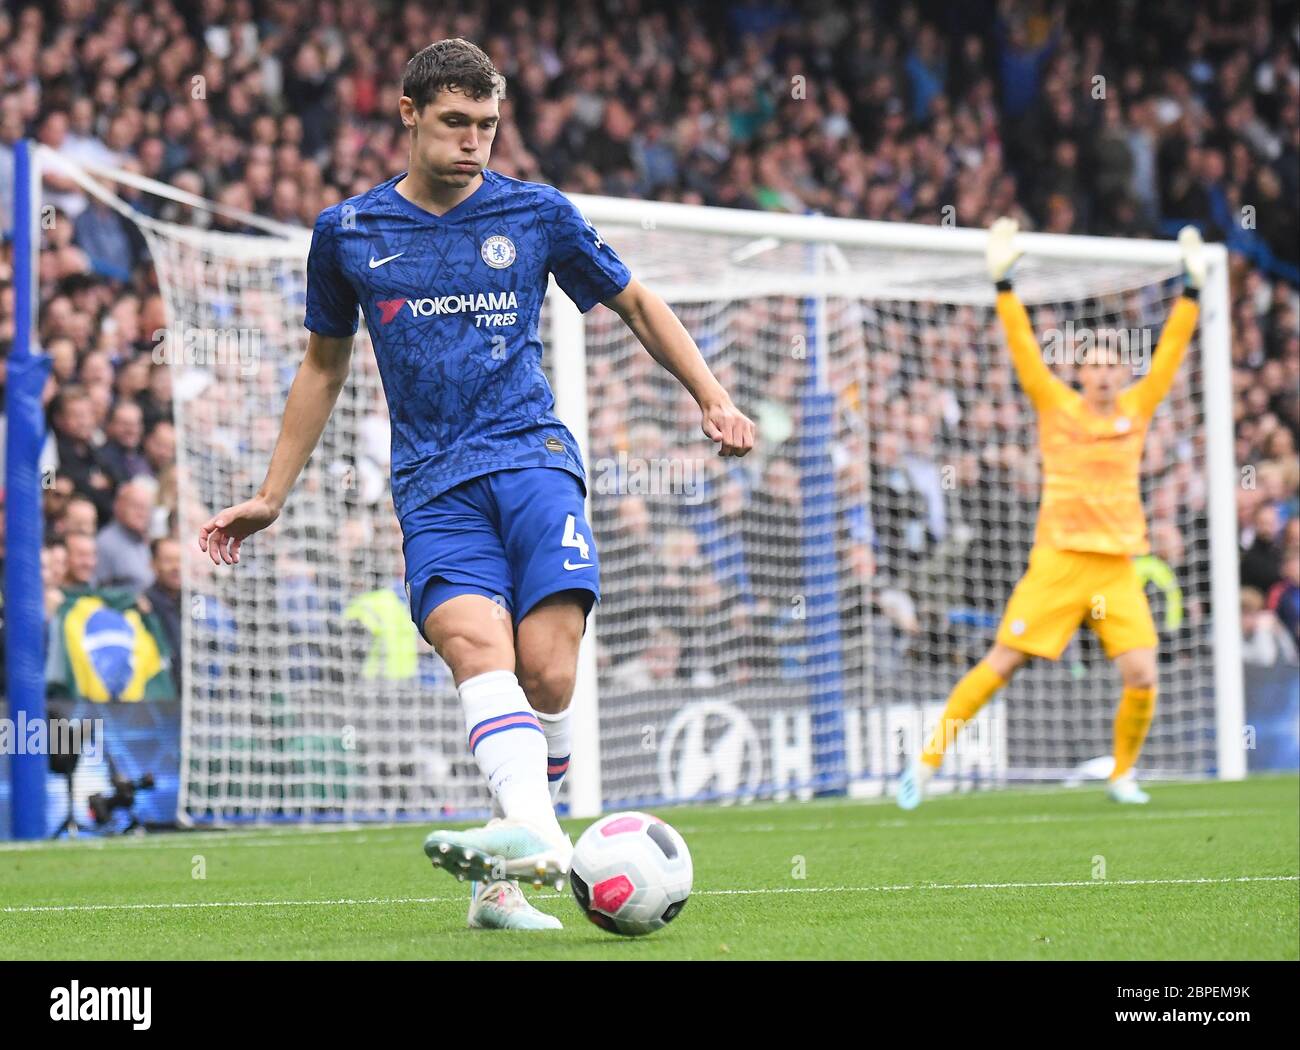 LONDON, ENGLAND - SEPTEMBER 22, 2019: Andreas Christensen of Chelsea pictured during the 2019/20 Premier League game between Chelsea FC and Liverpool FC at Stamford Bridge. Stock Photo